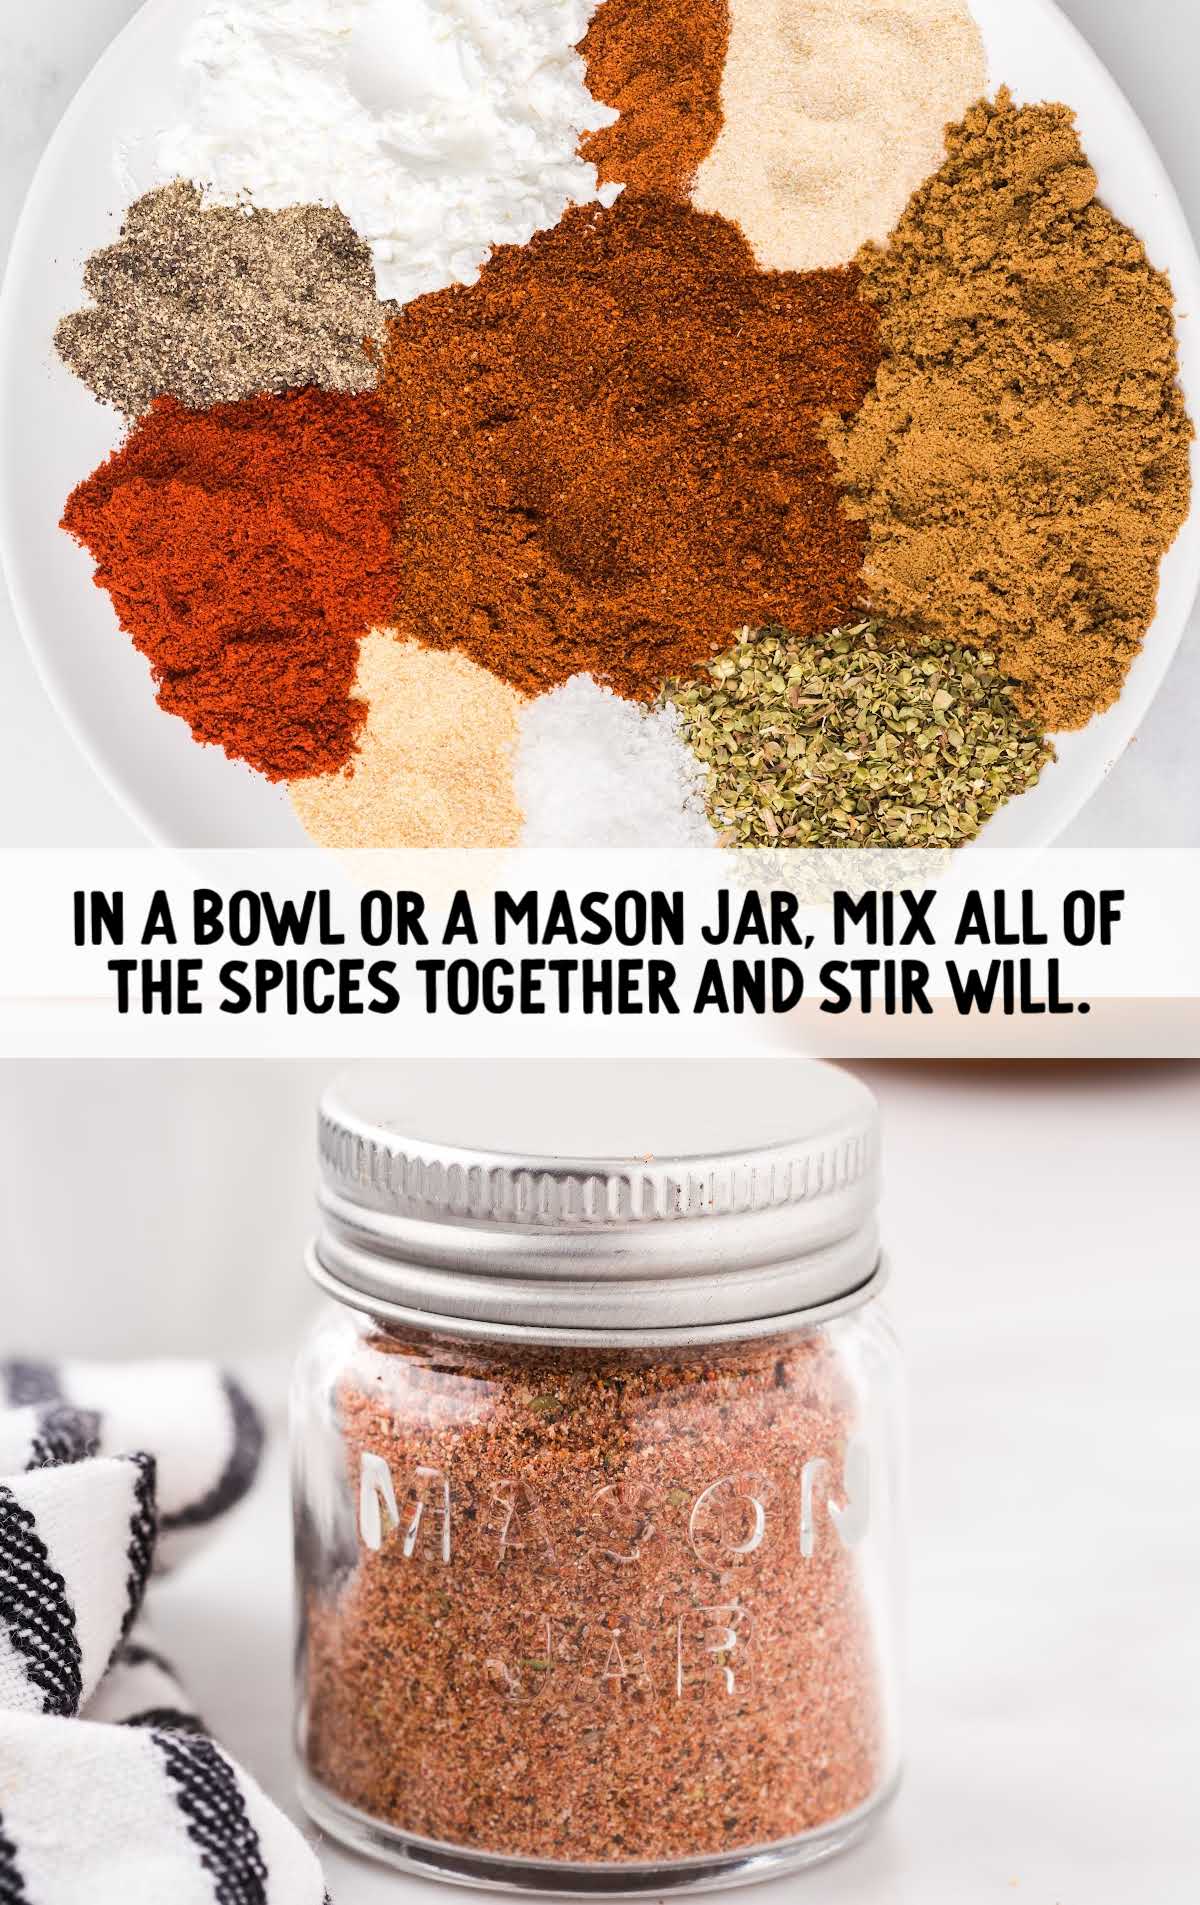 seasoning ingredients on a plate and ingredients mixed together in a mason jar